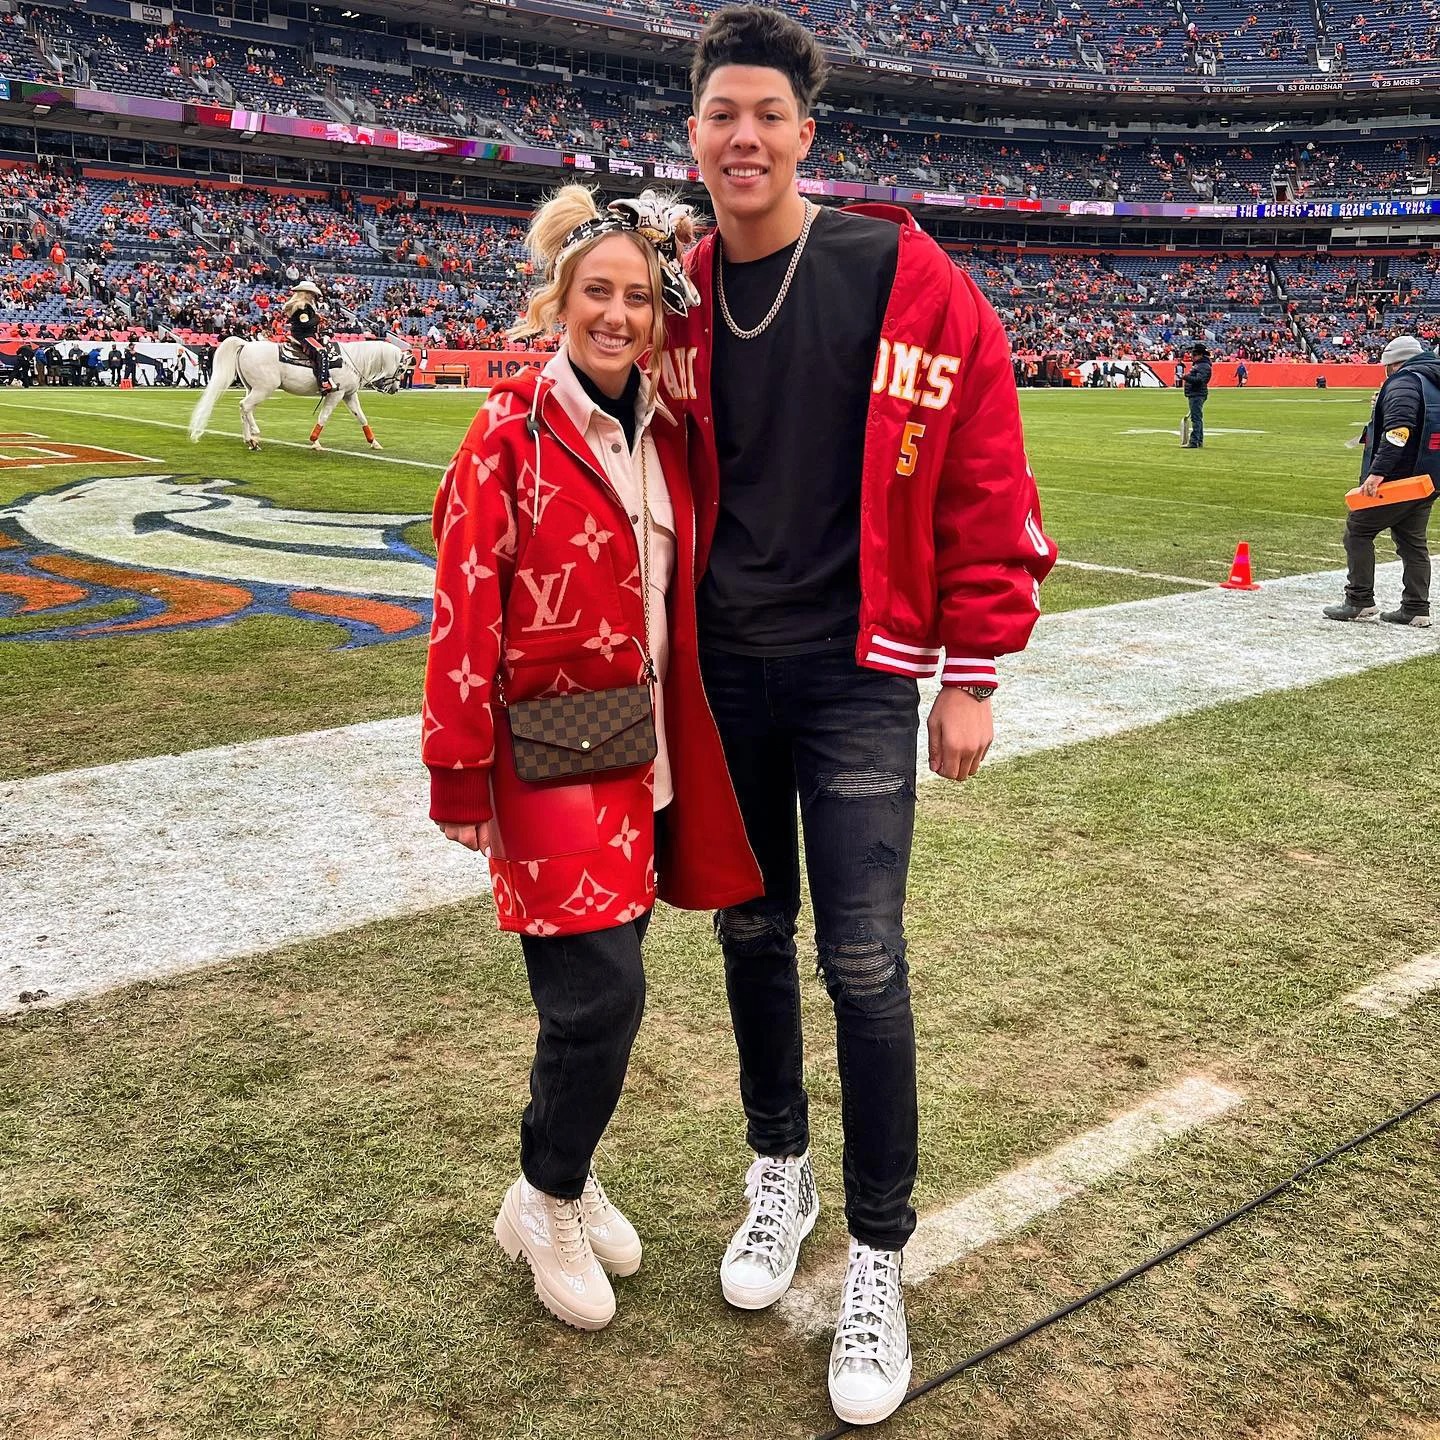 How Brittany Mahomes went from pro soccer standout to NFL wife